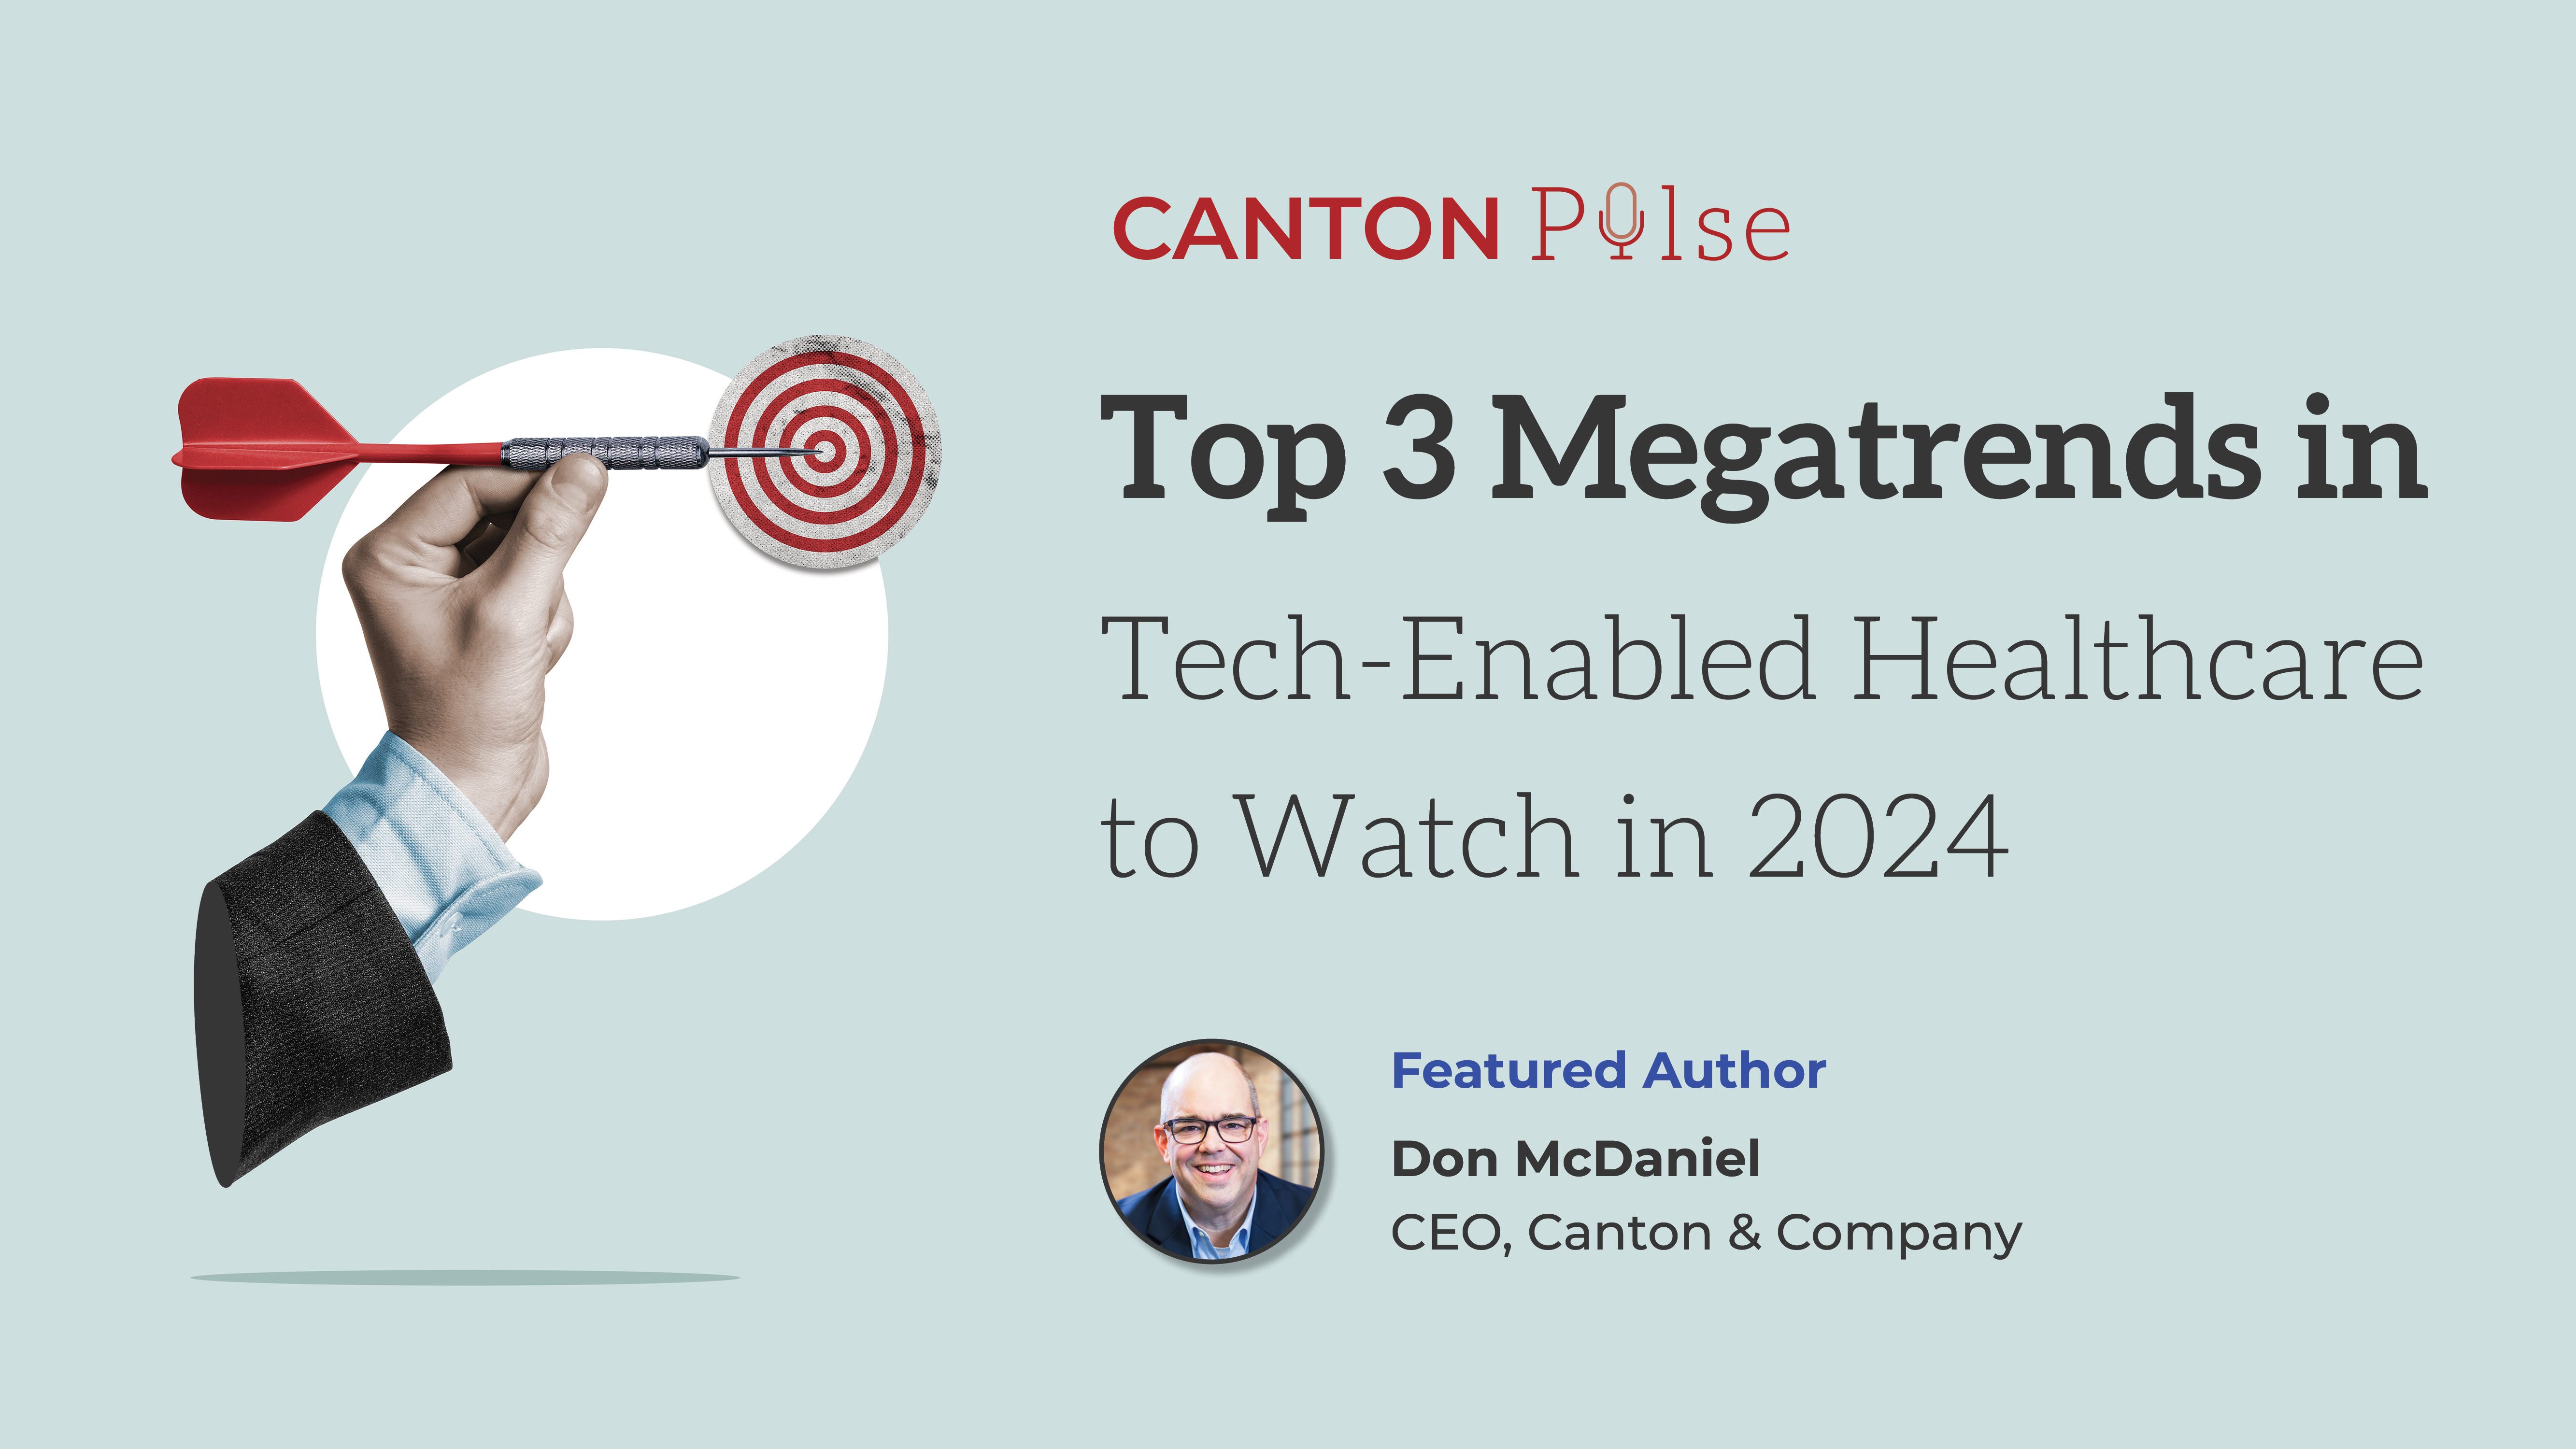 Top 3 Megatrends in Tech-Enabled Healthcare to Watch in 2024 